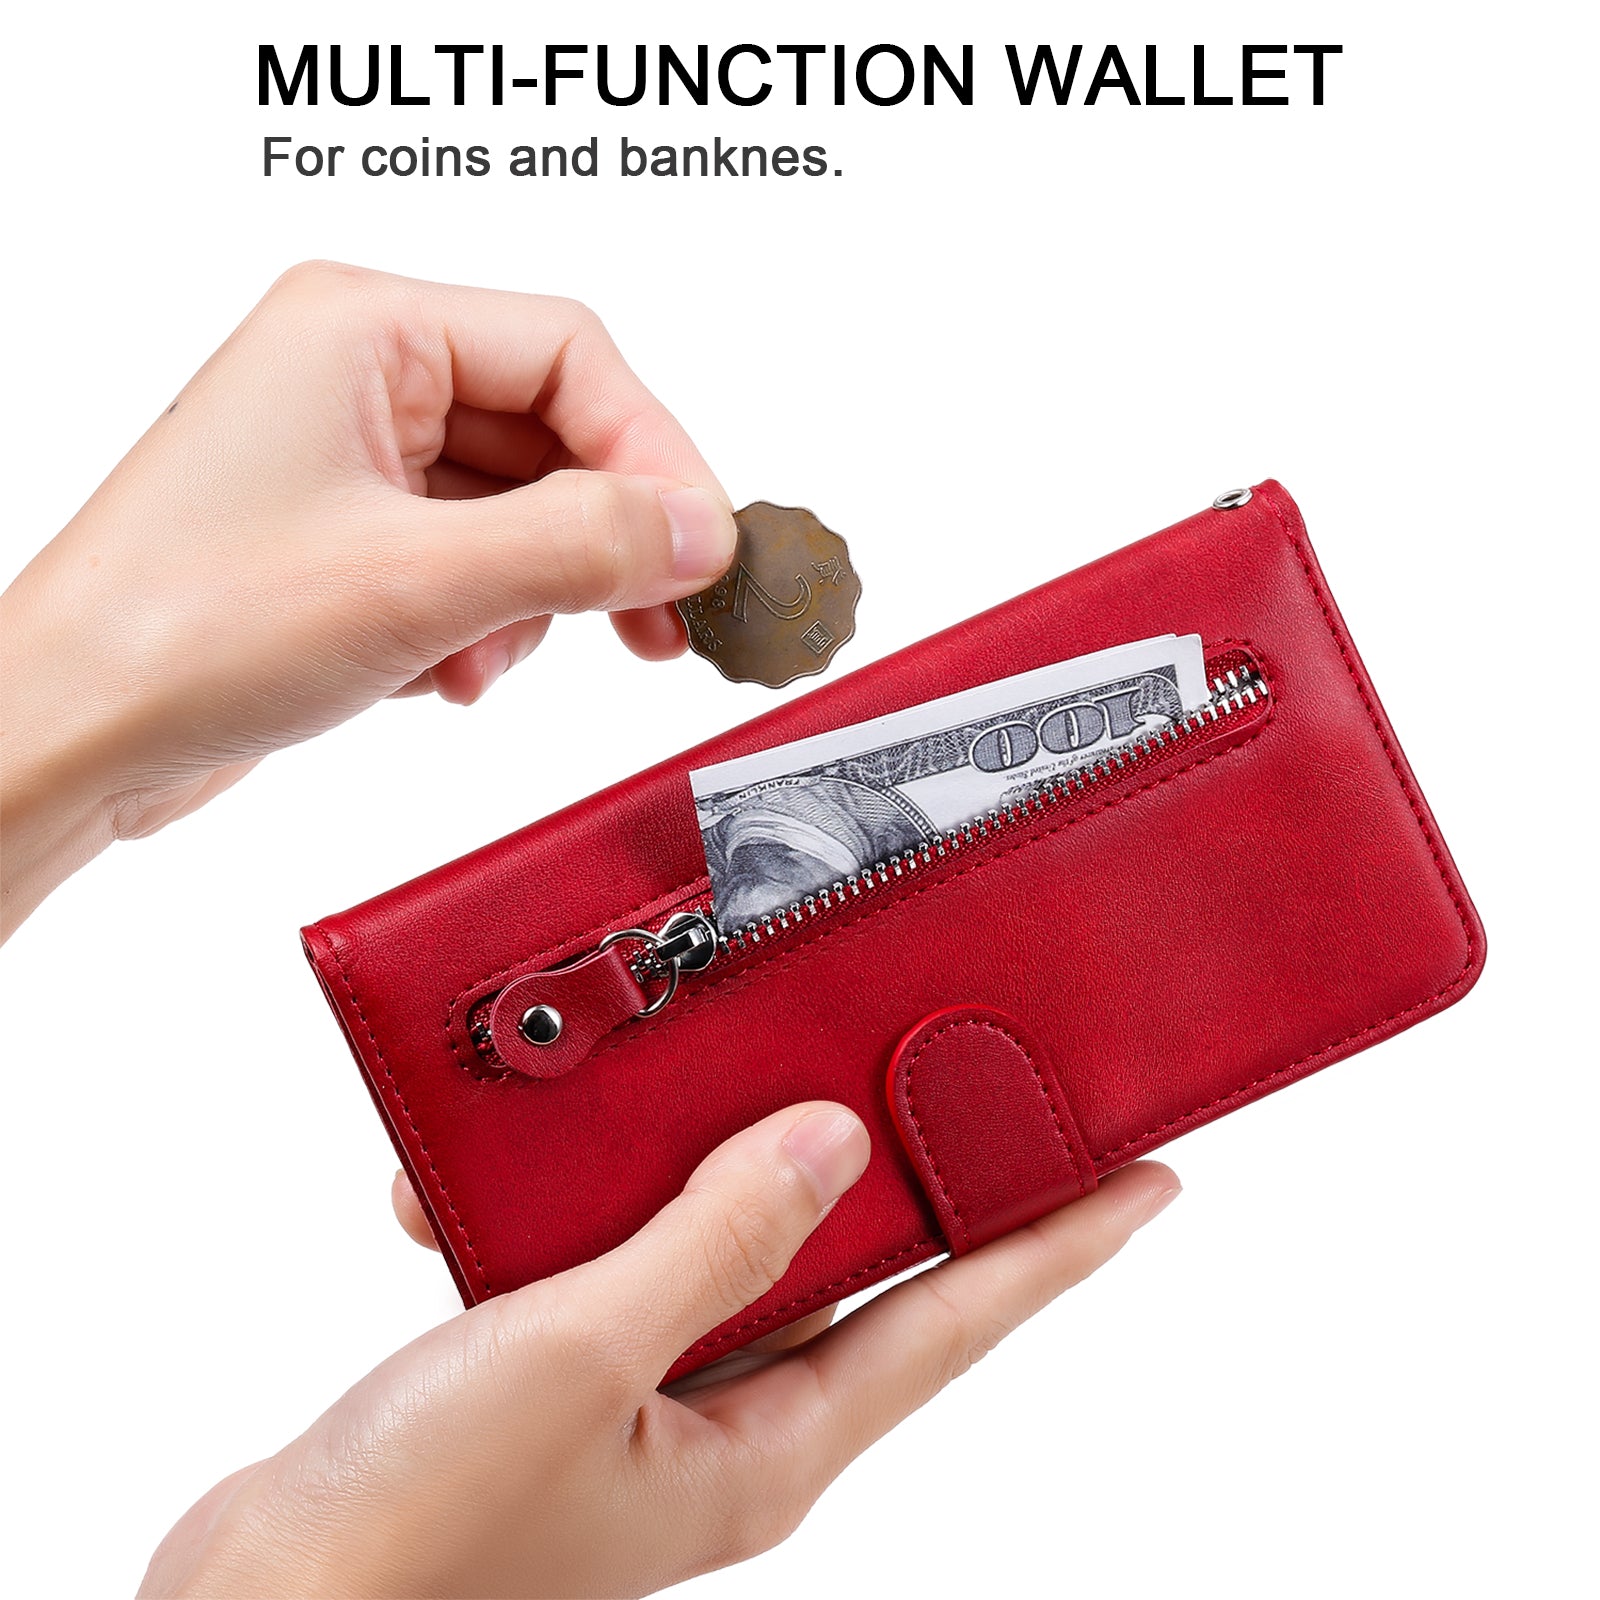 For vivo Y100 5G (Indonesia) / Y200e 5G / T3 5G / V30 Lite 4G Case Zipper Wallet Leather Phone Cover - Red